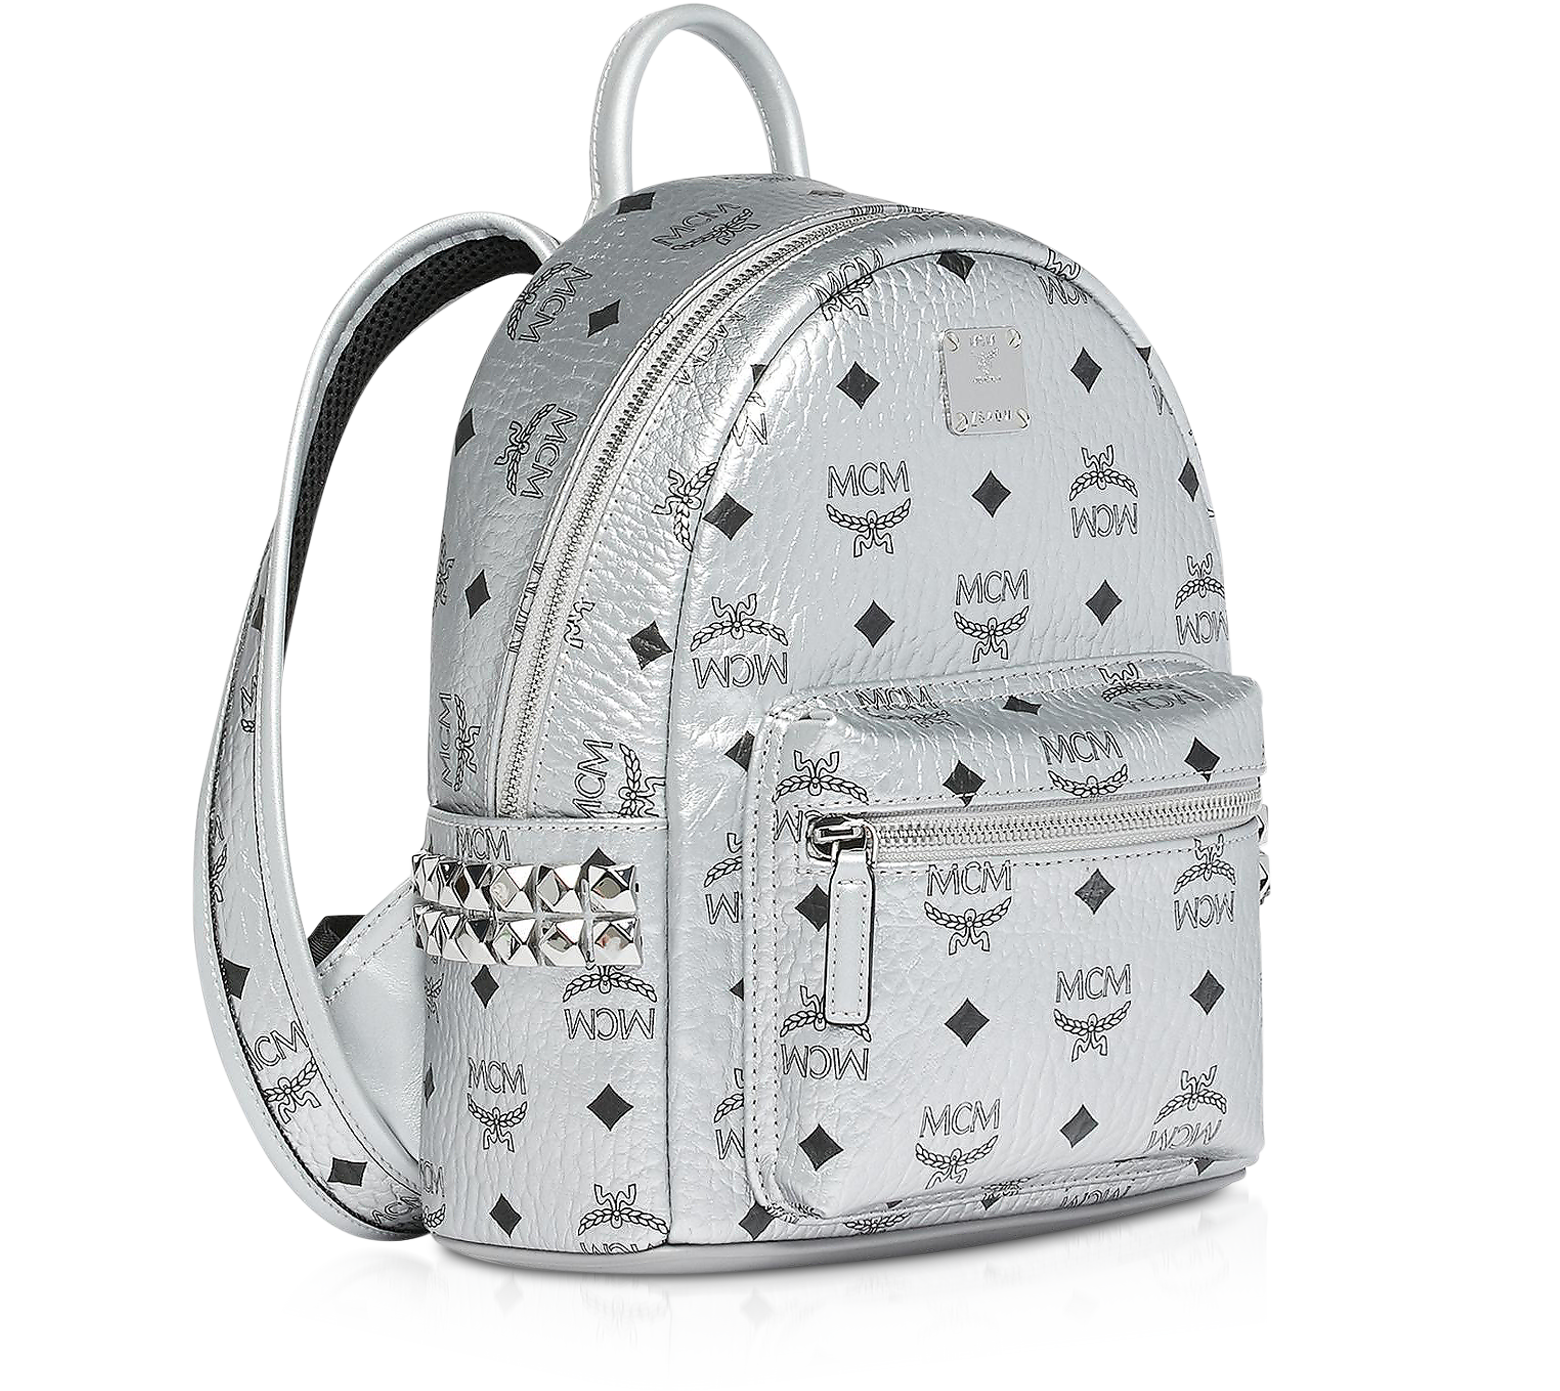 MCM Pink Mini Stark Backpack at FORZIERI